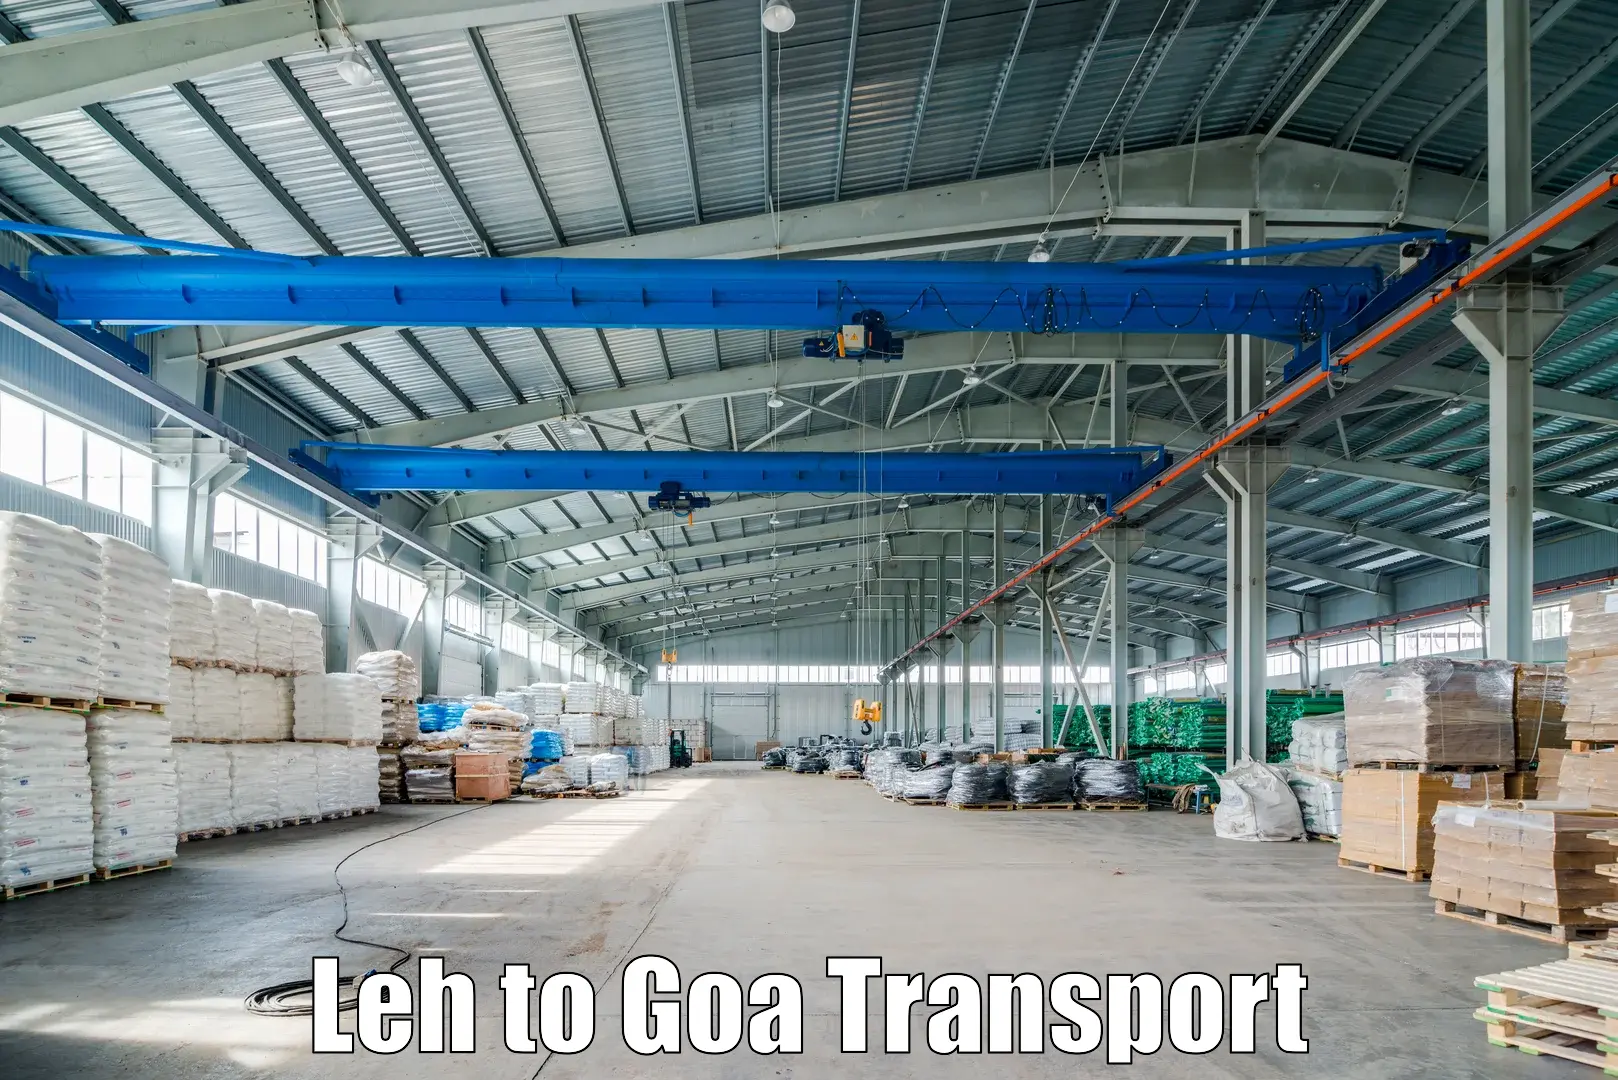 Nearby transport service Leh to Goa